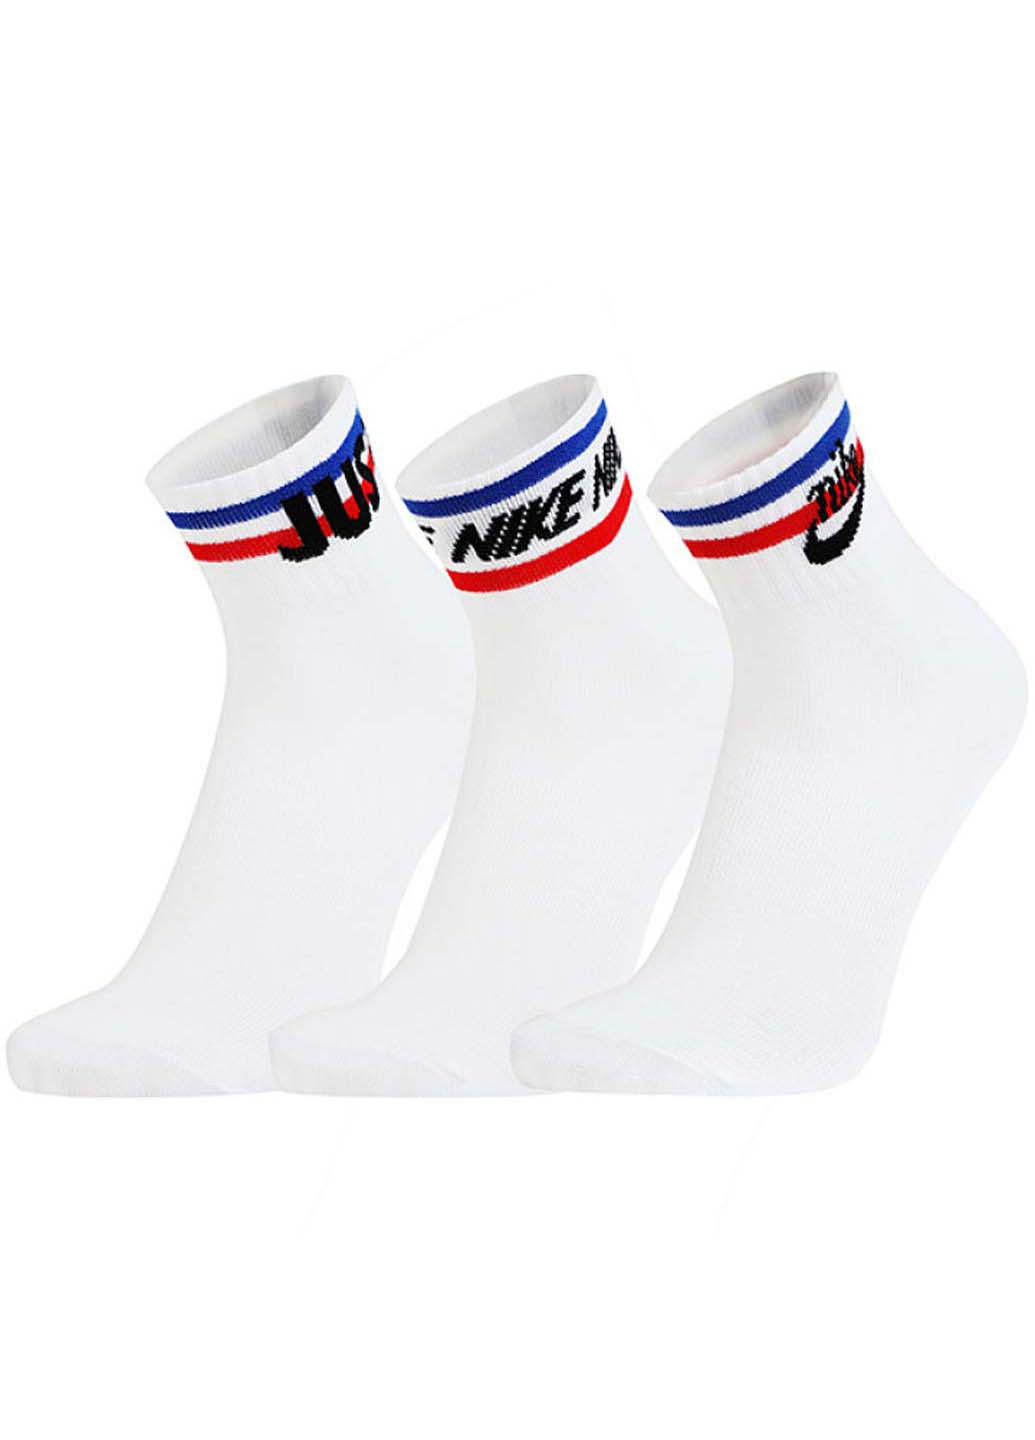 Носки Nike nsw everyday essential an 3-pack (256963221)